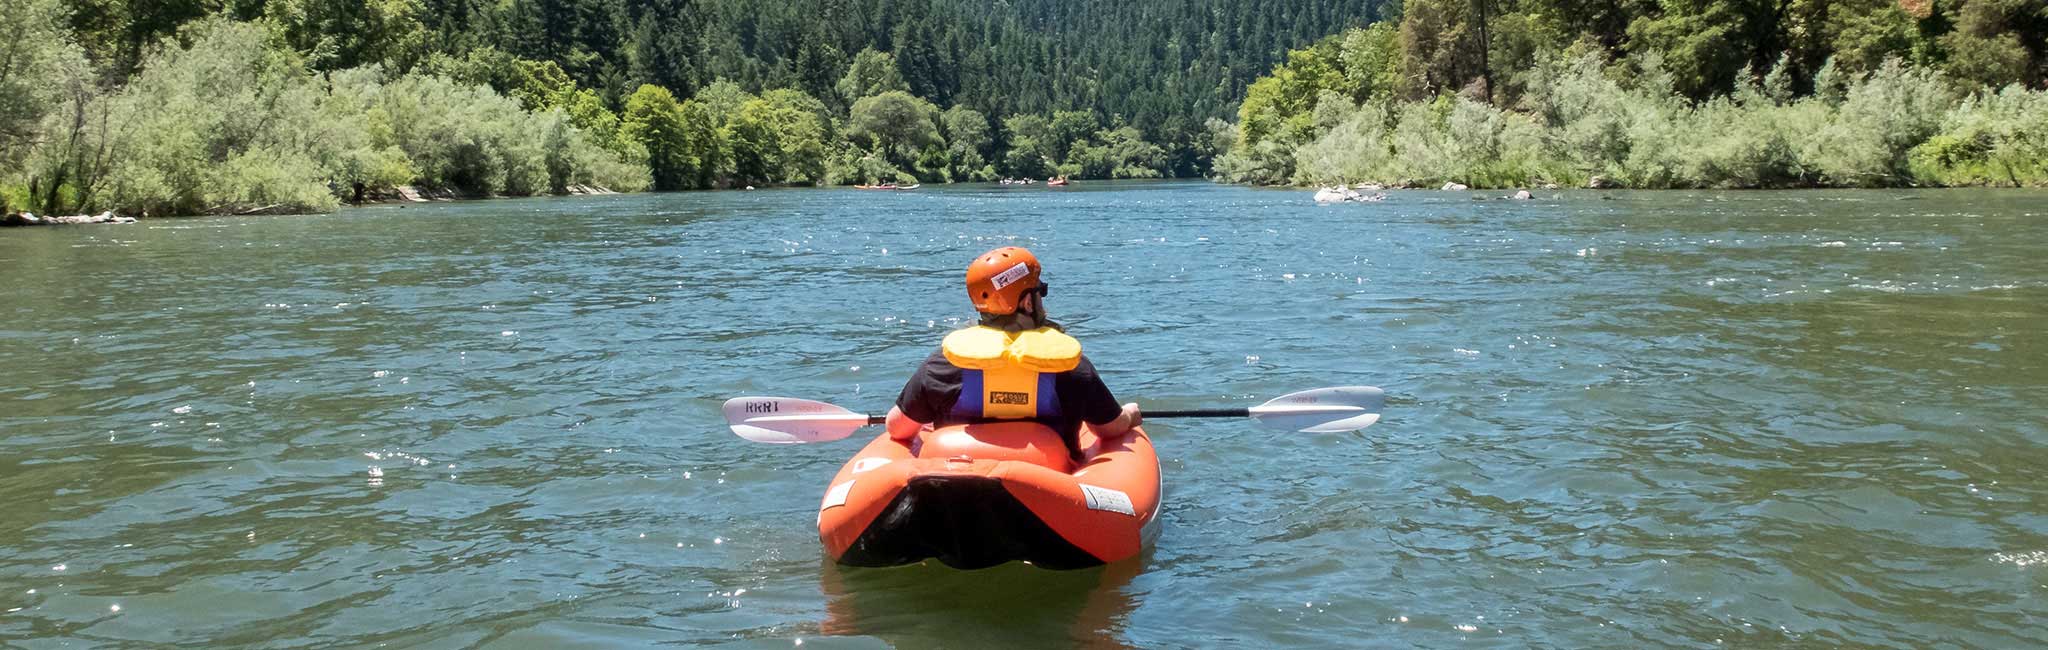 A person in a kayak on the Rogue River.